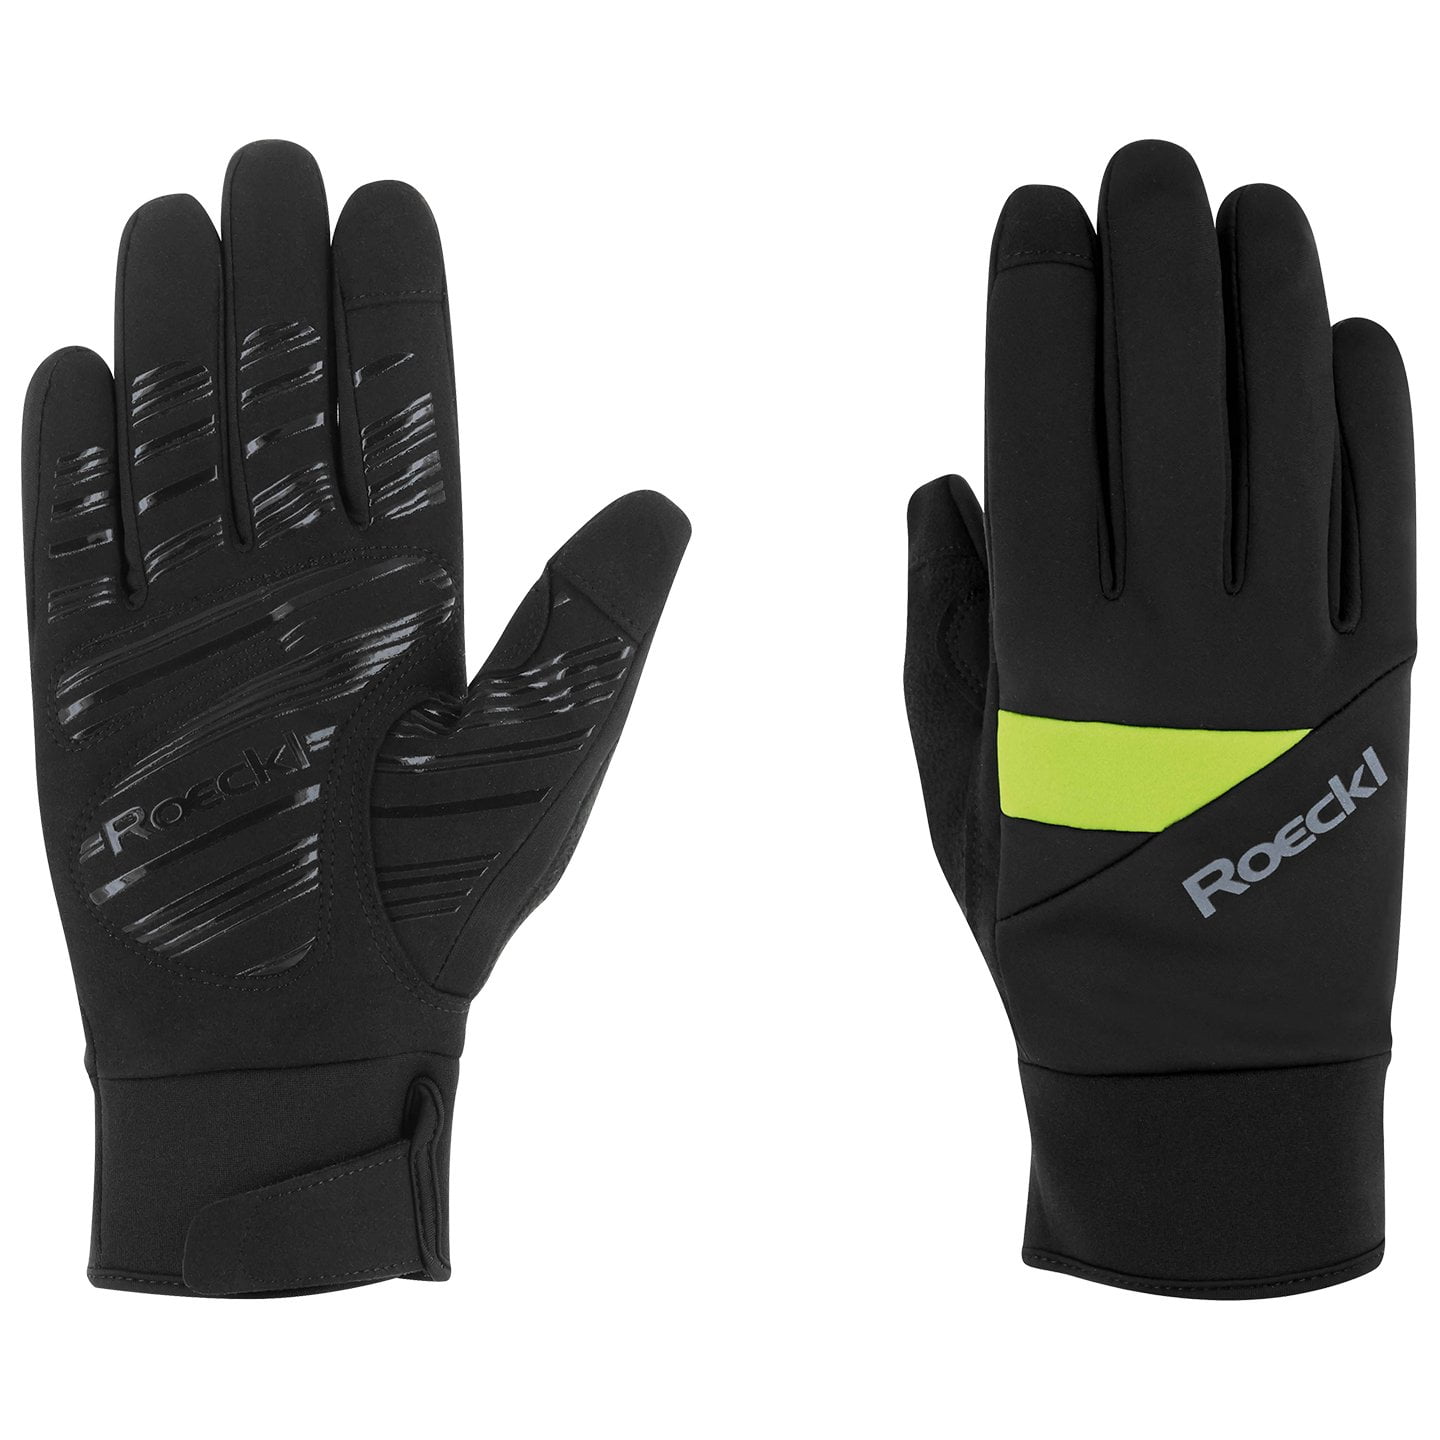 ROECKL Reichenthal Winter Gloves Winter Cycling Gloves, for men, size 6,5, MTB gloves, Bike clothes